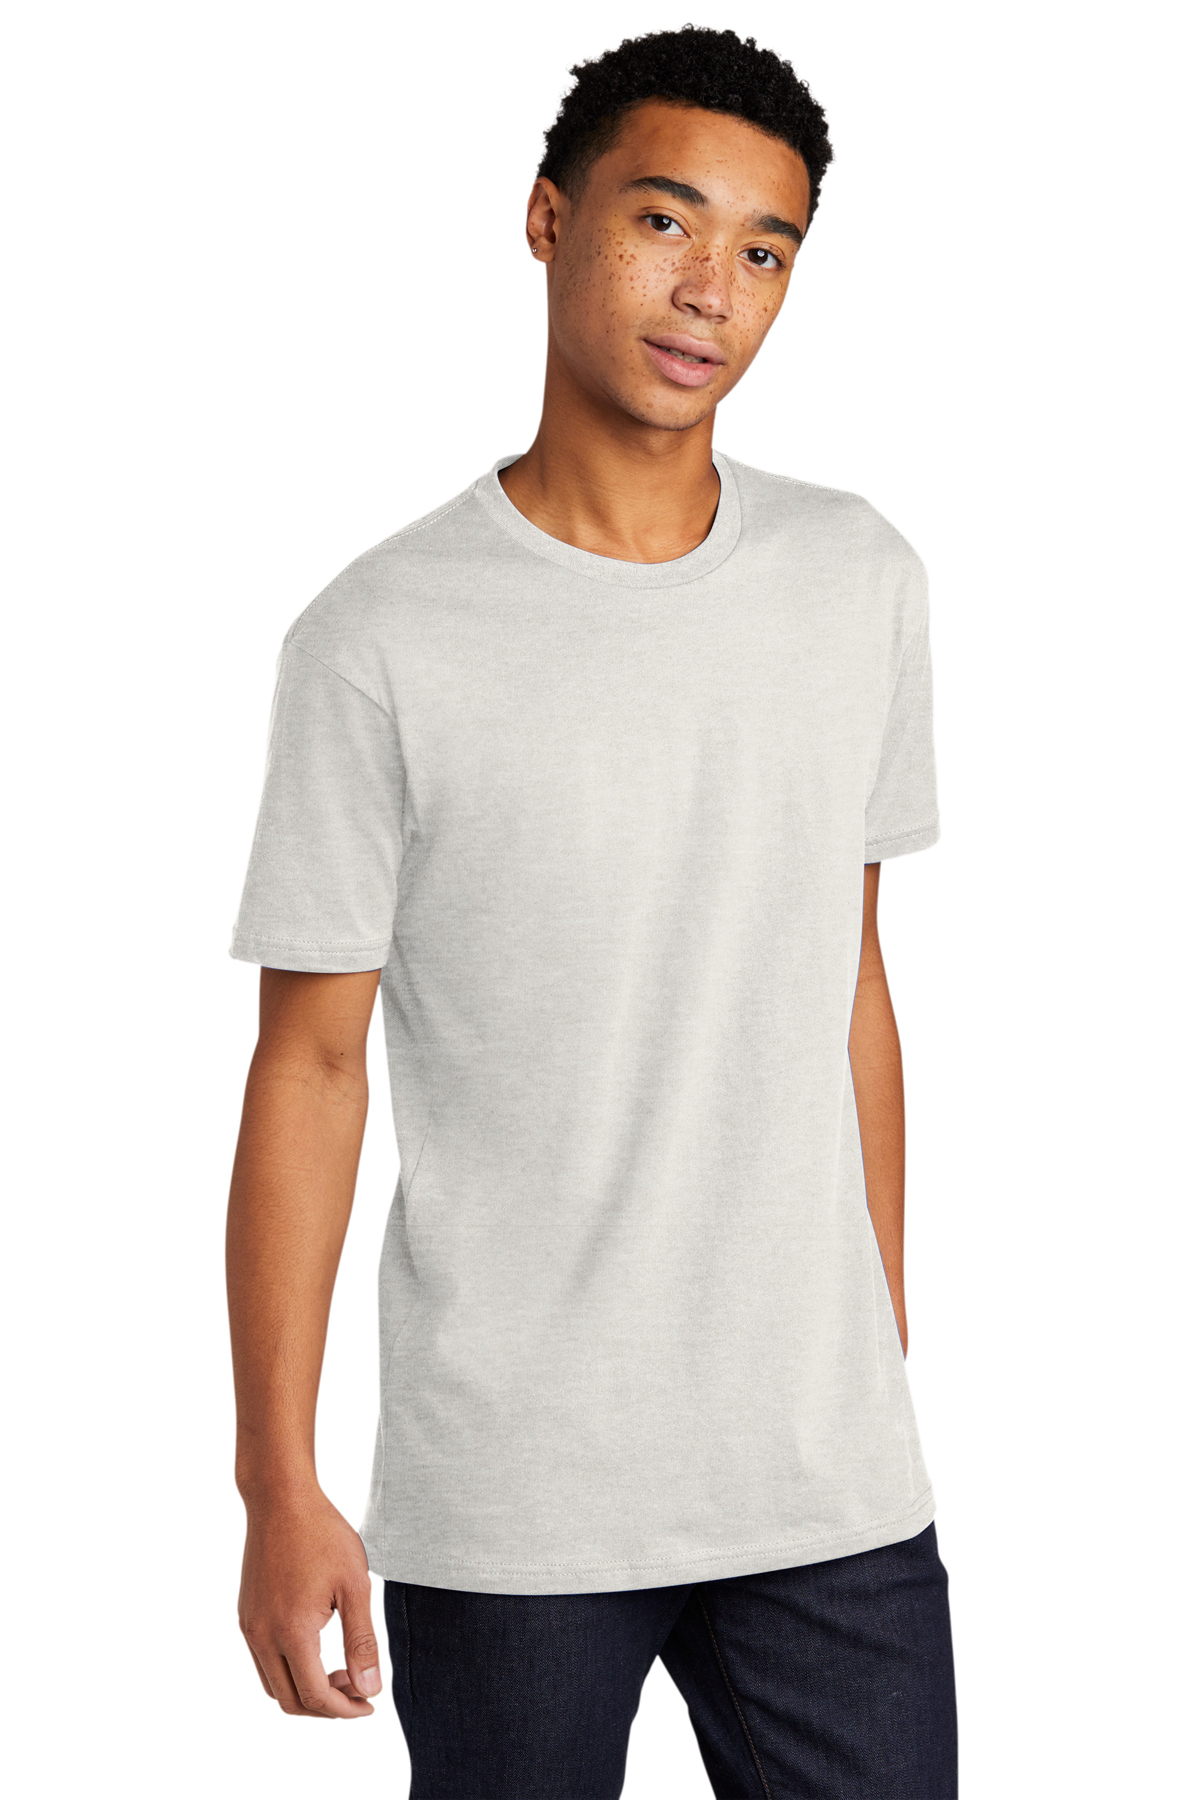 Next Level Apparel Unisex Cotton Tee | Product | Company Casuals